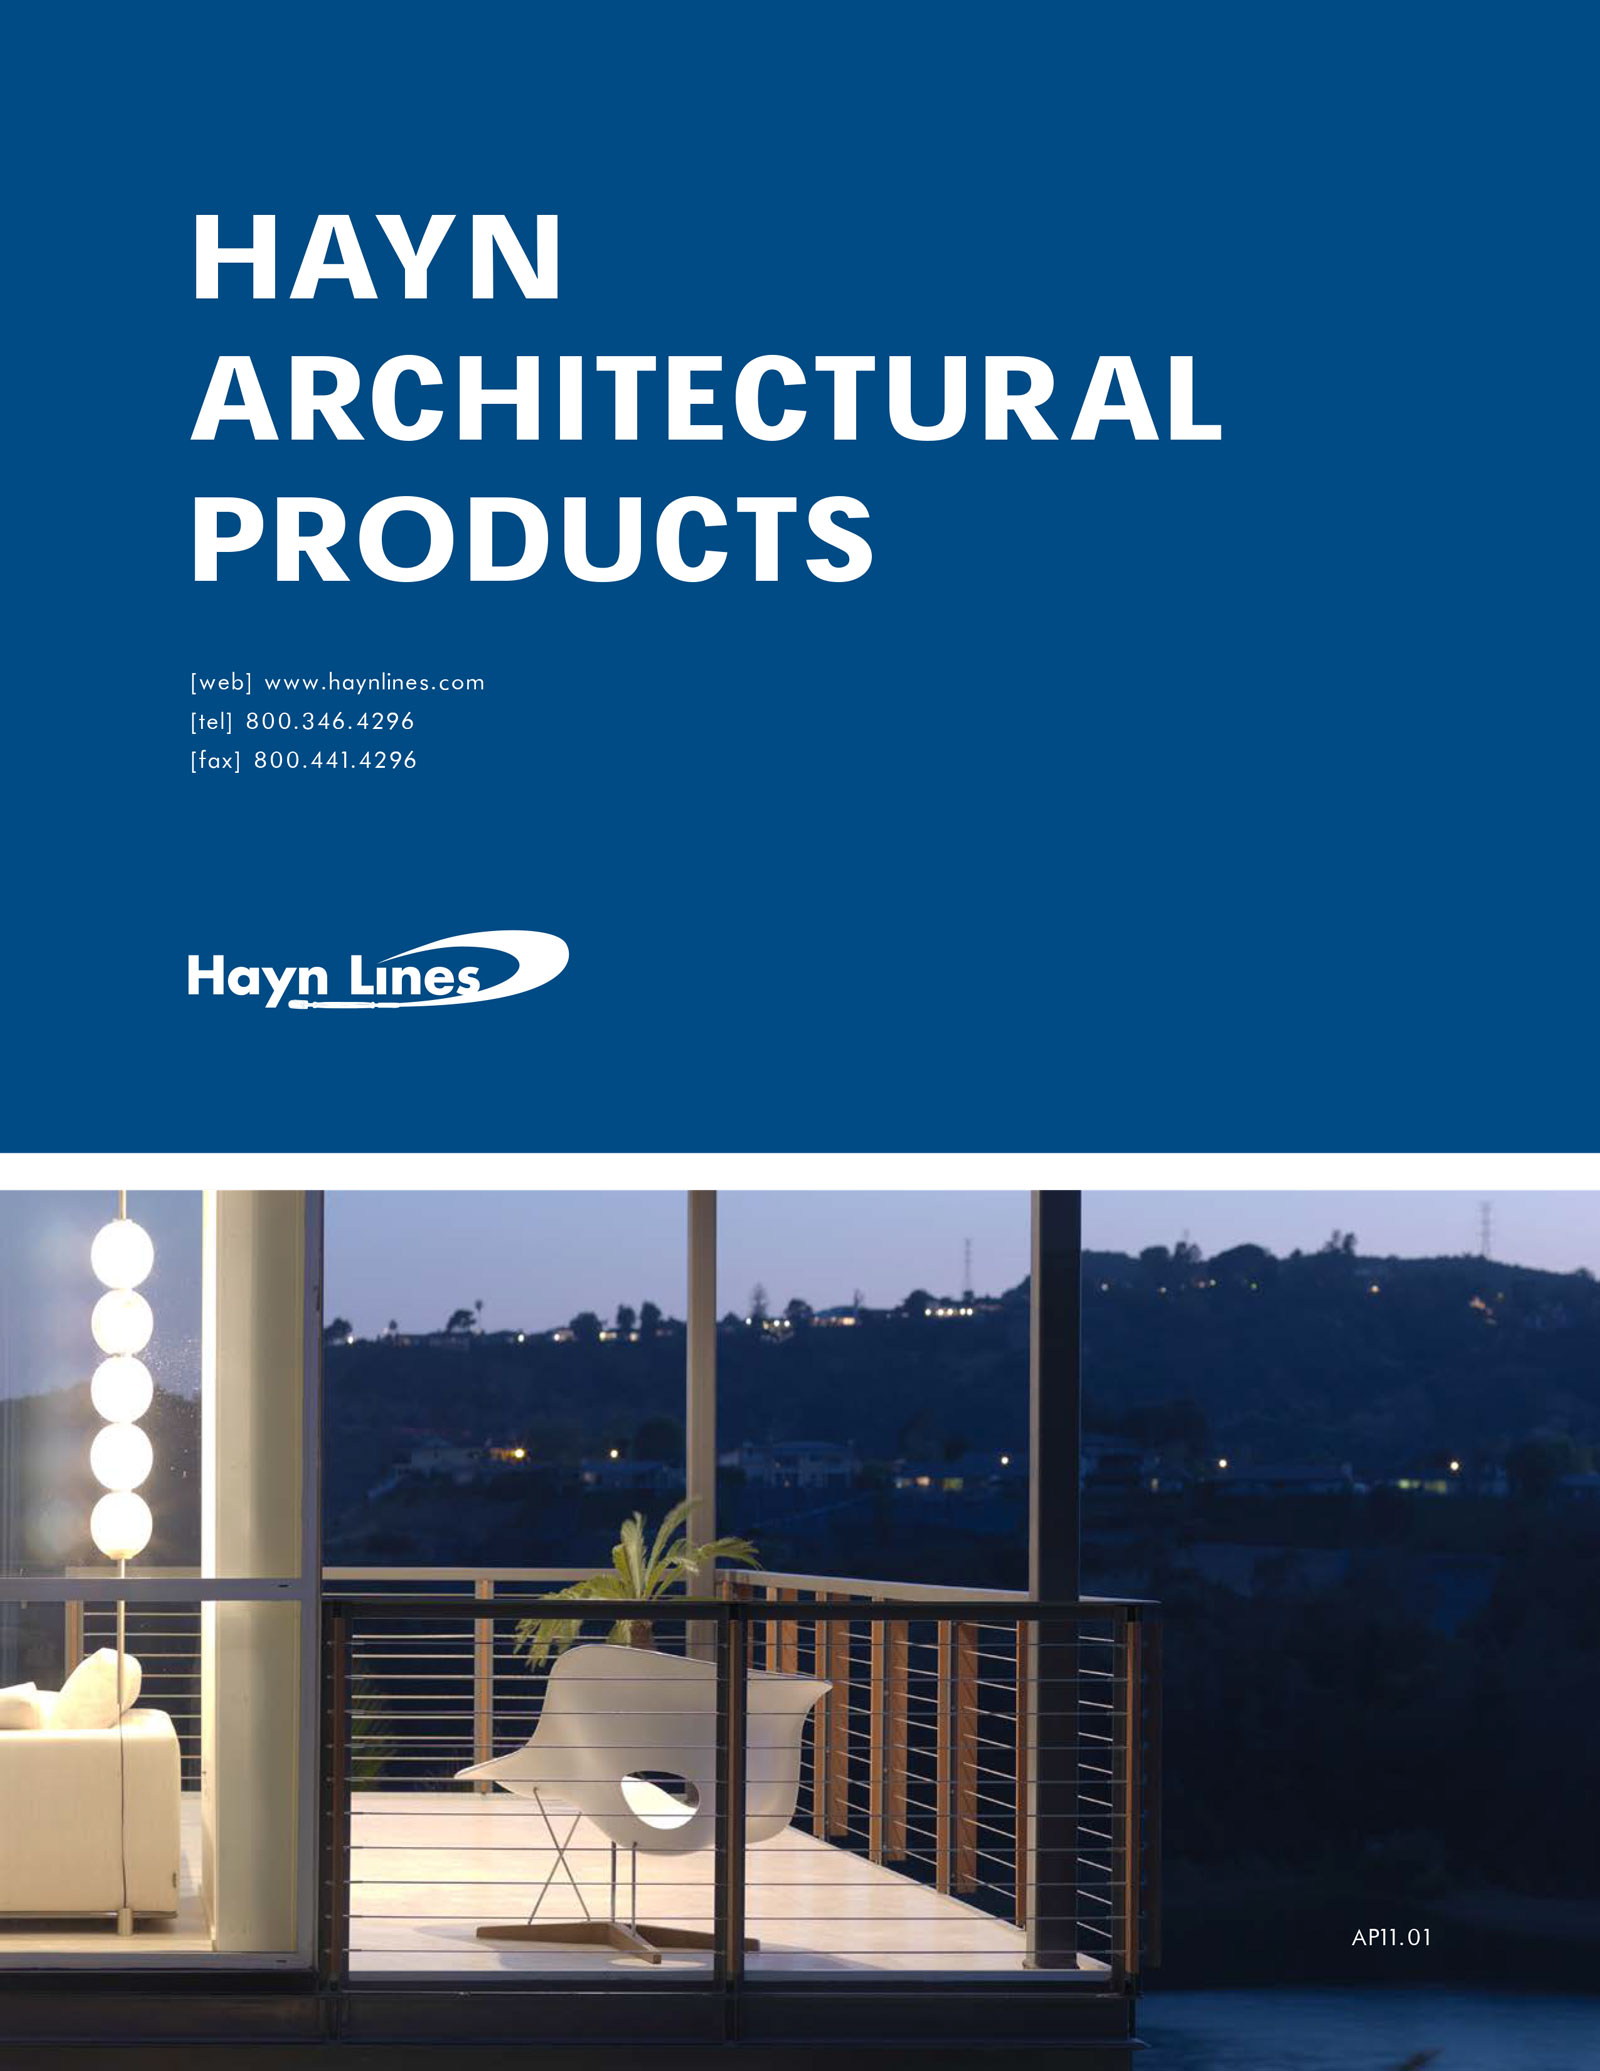 Hayn Architectural Products